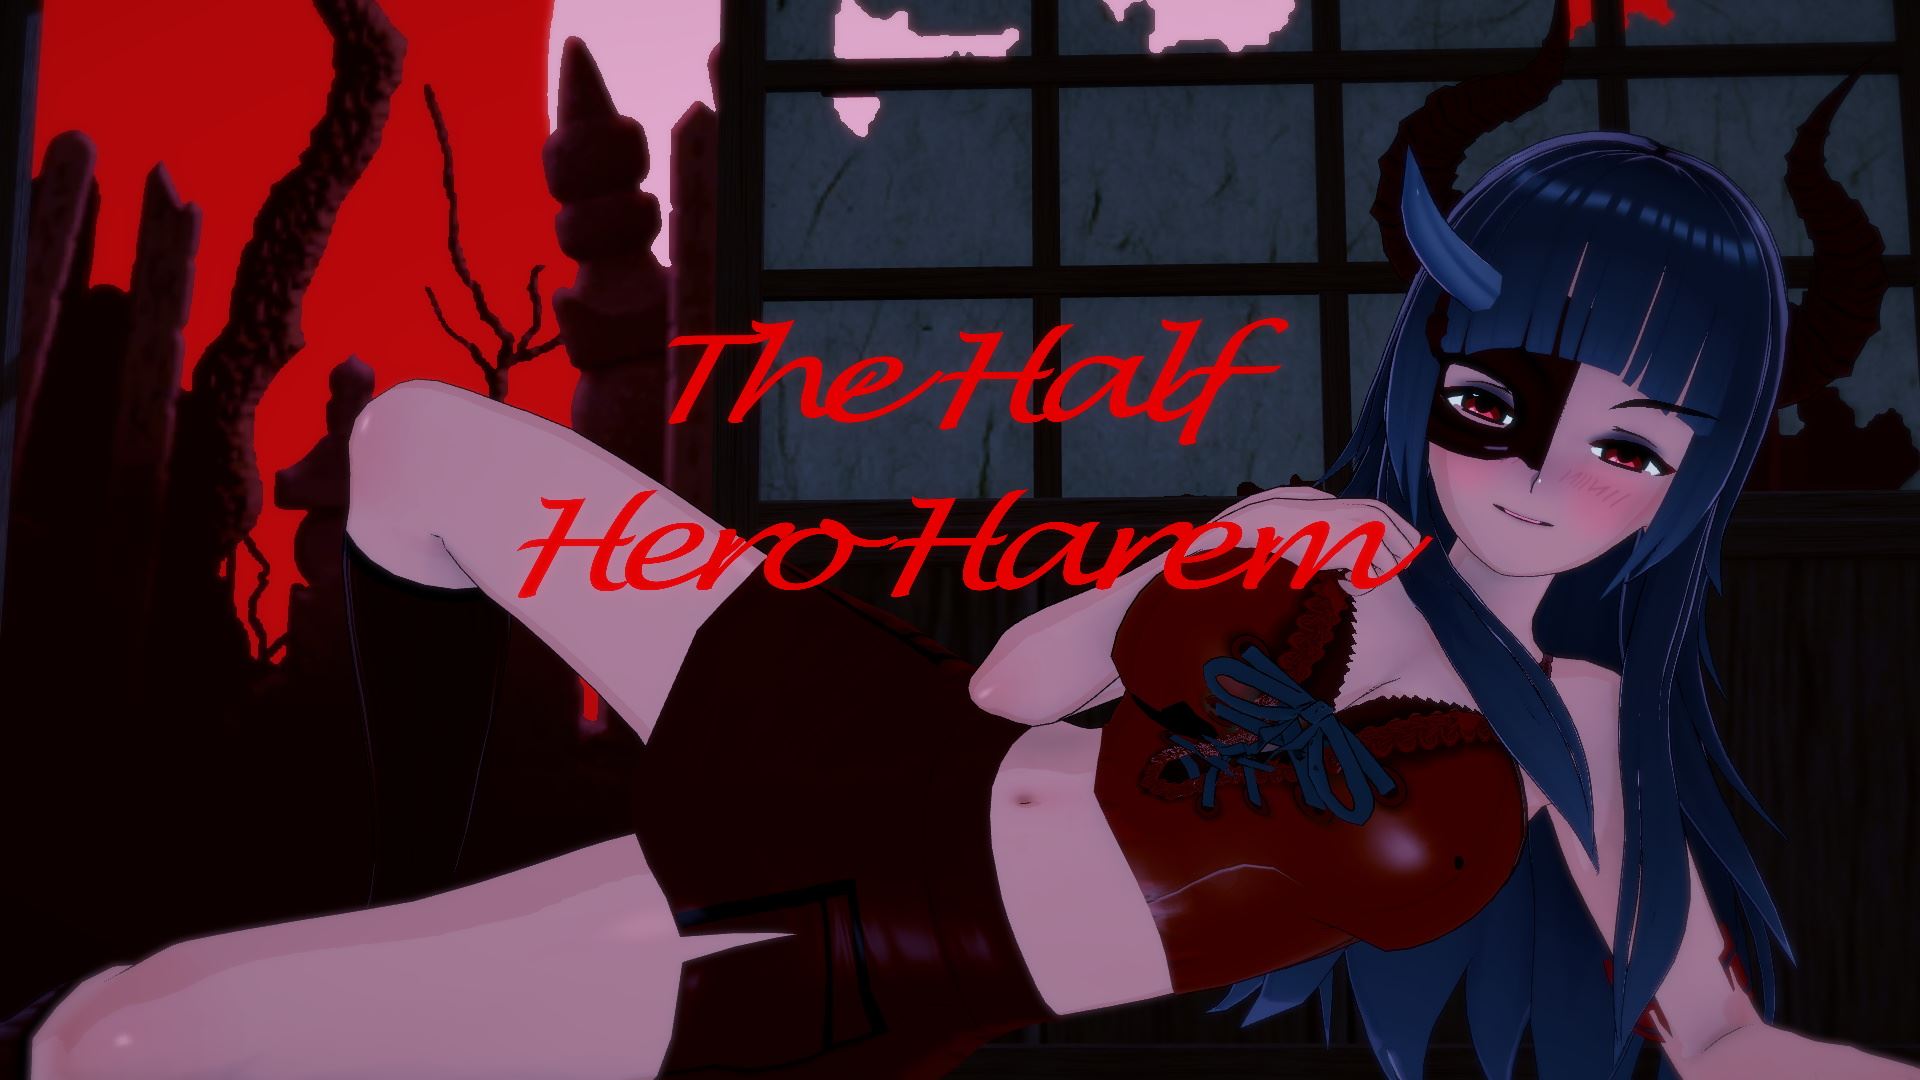 The Half Hero Harem porn xxx game download cover